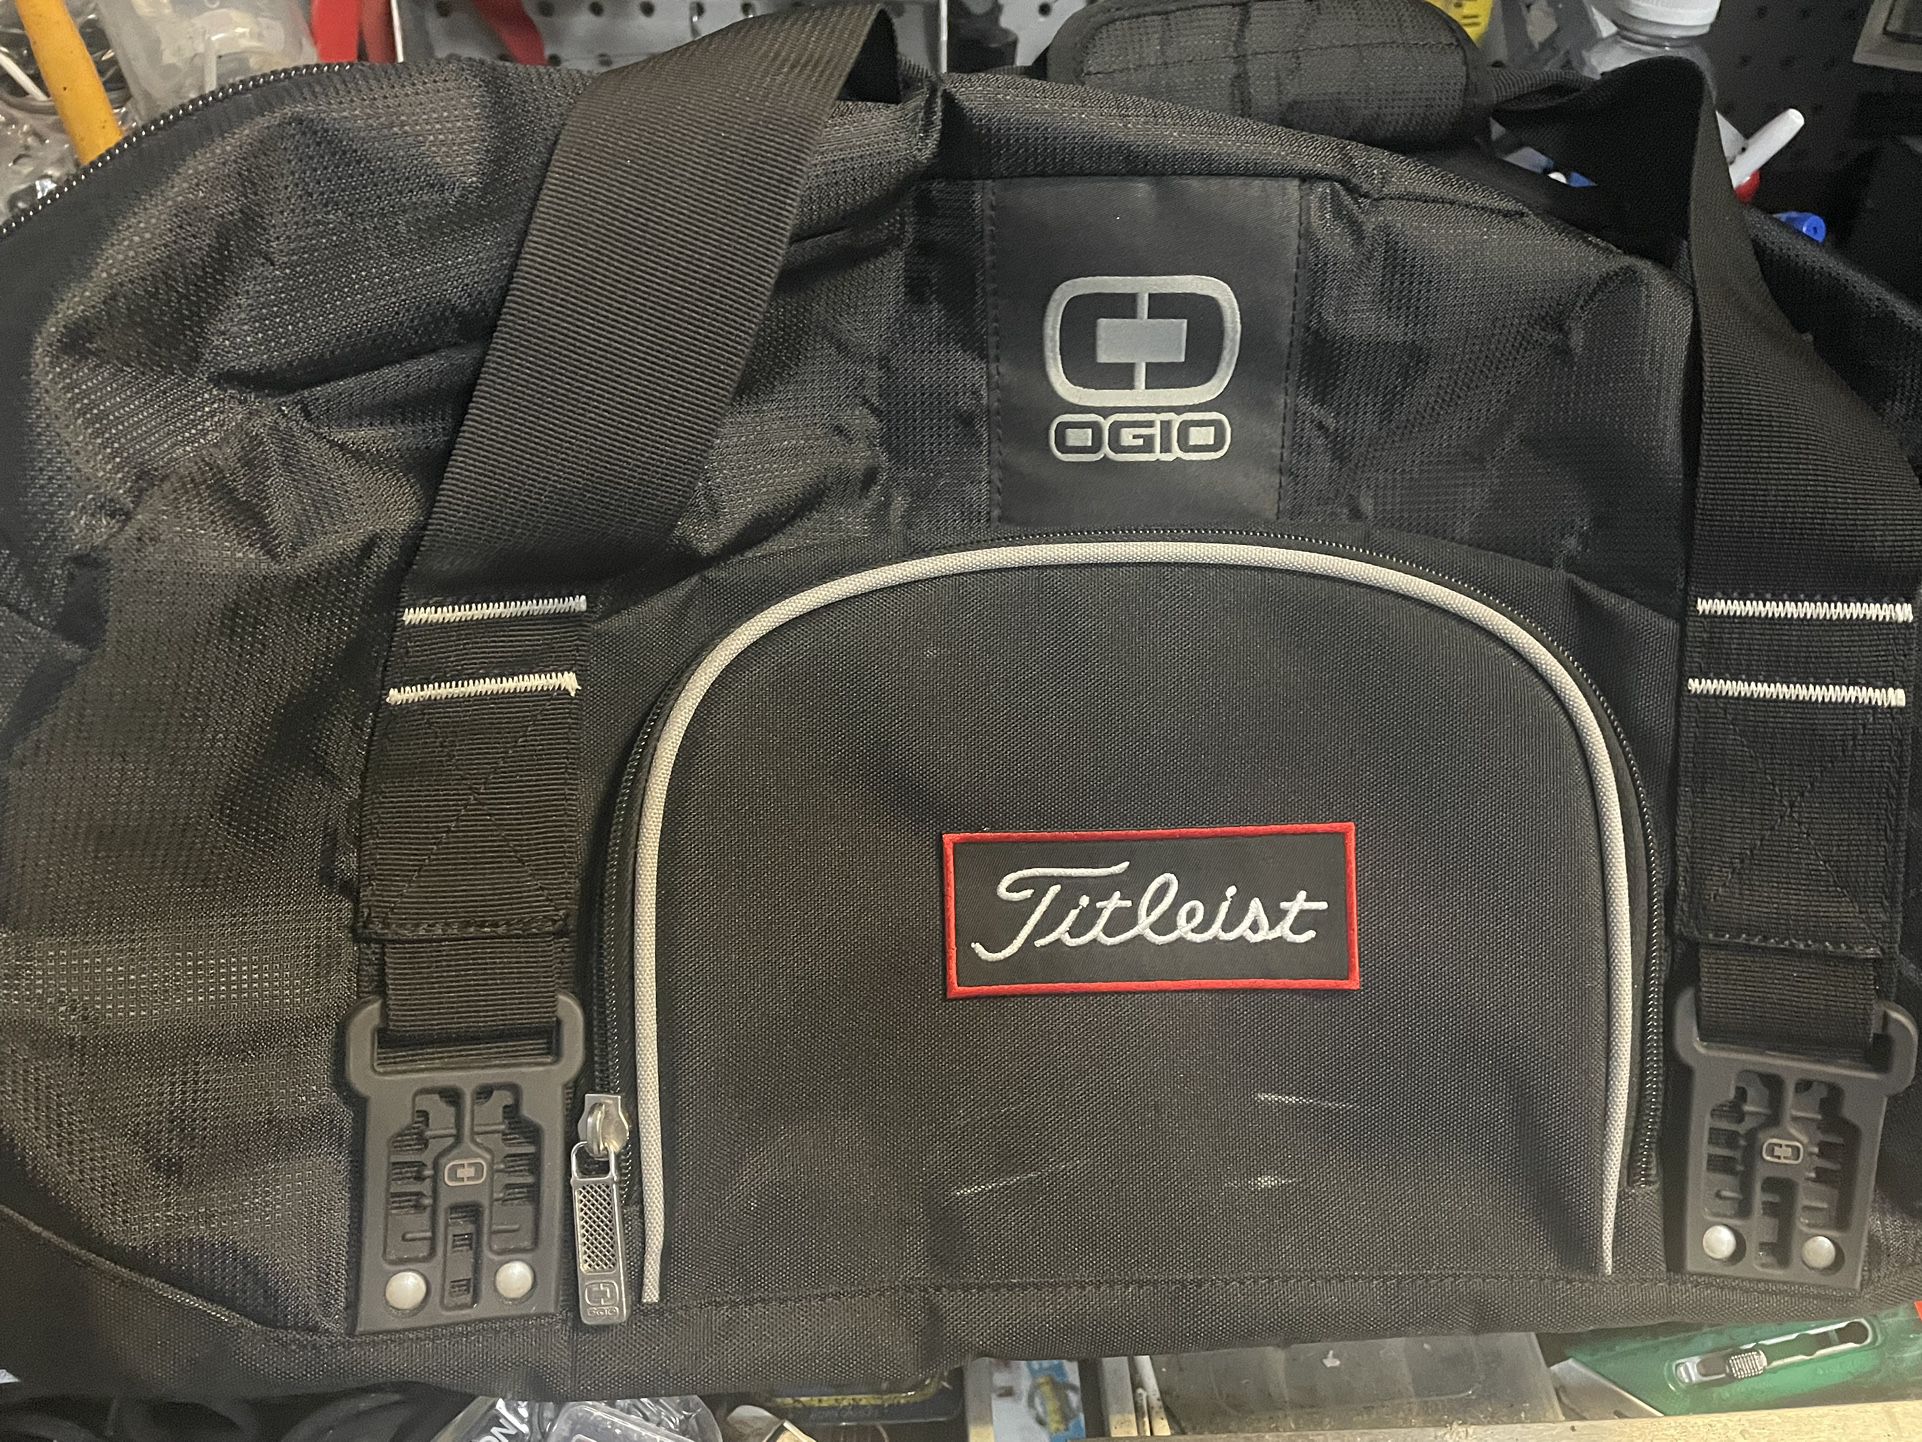 Ogio Duffel Bag With Titleist Patch  